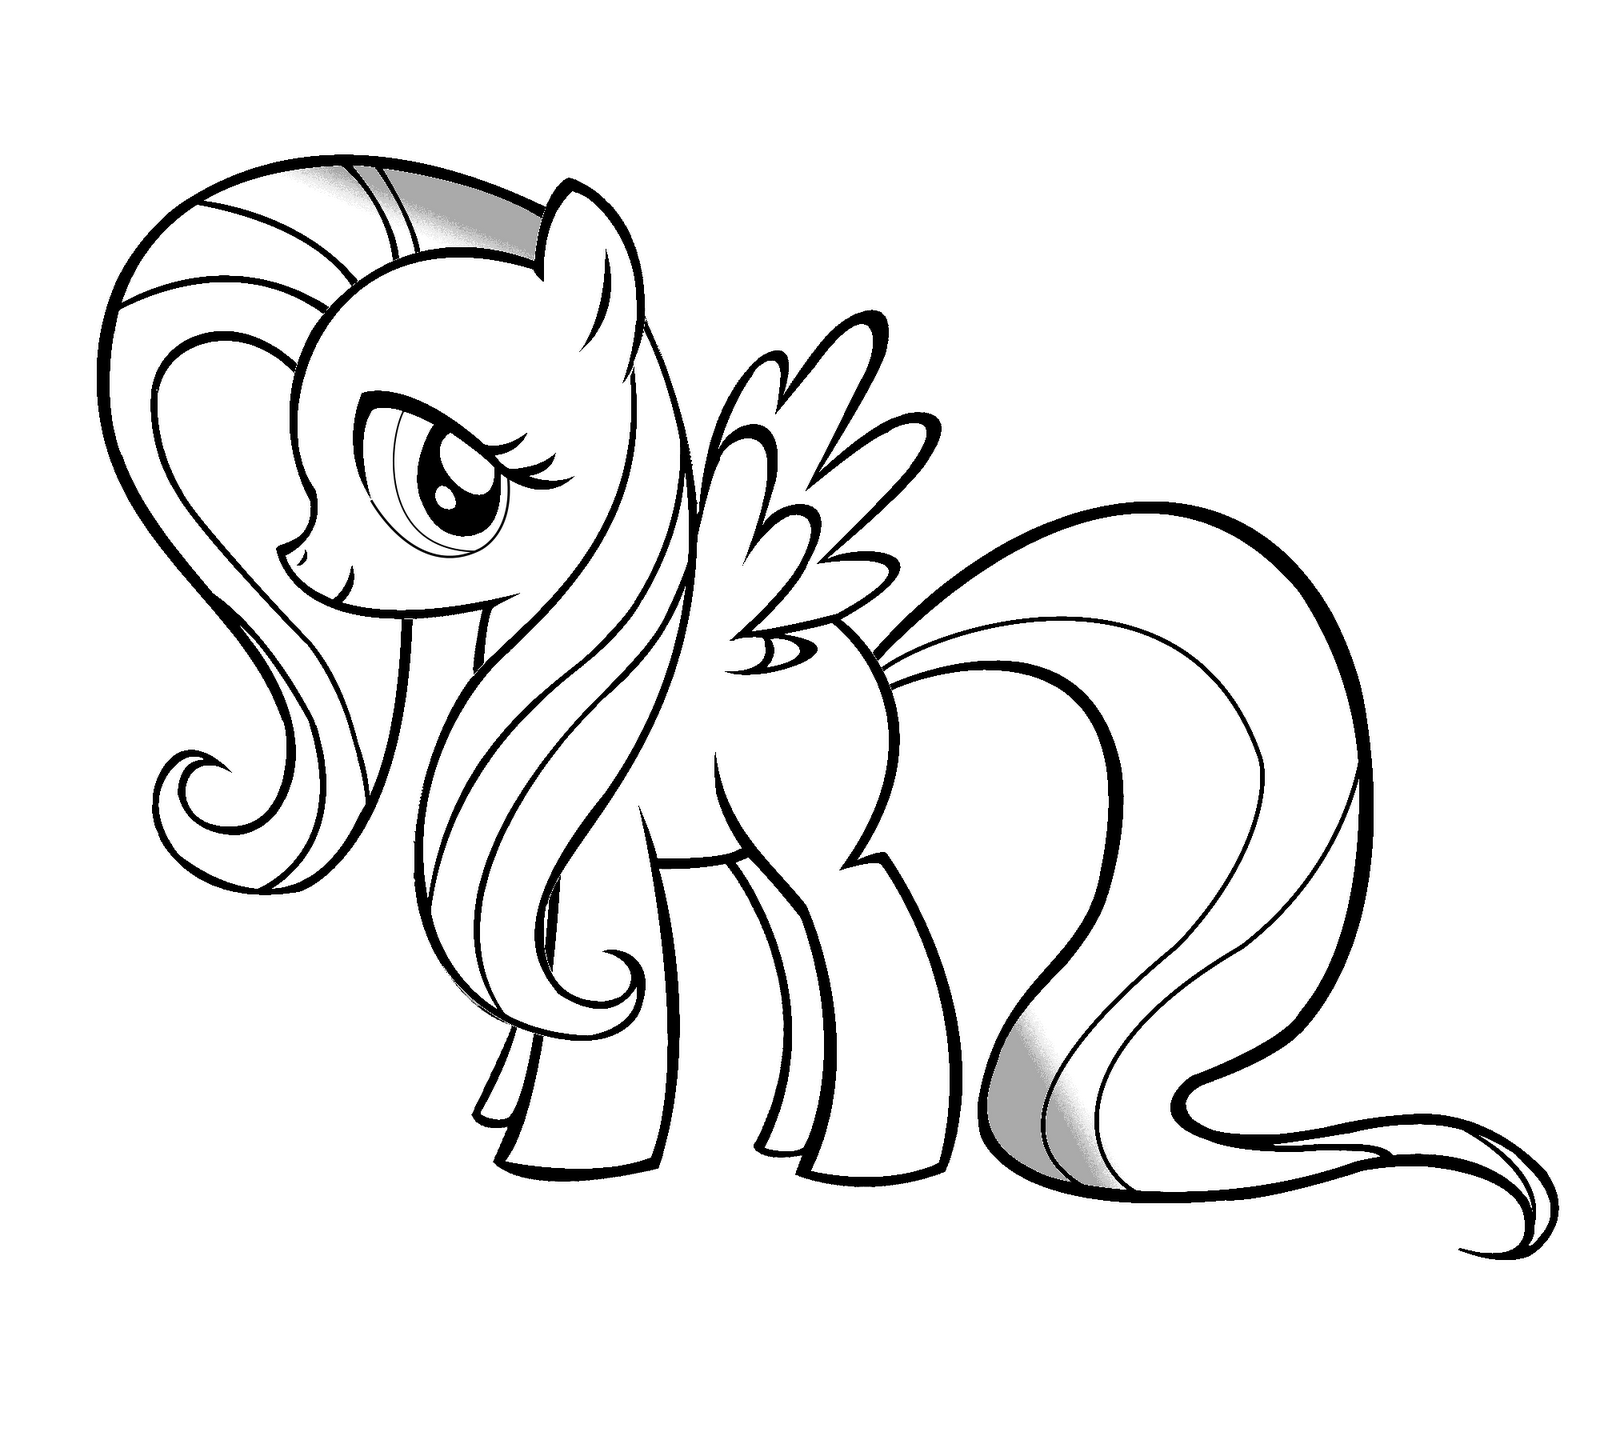 coloring pages of fluttershy fluttershy coloring pages best coloring pages for kids pages fluttershy coloring of 